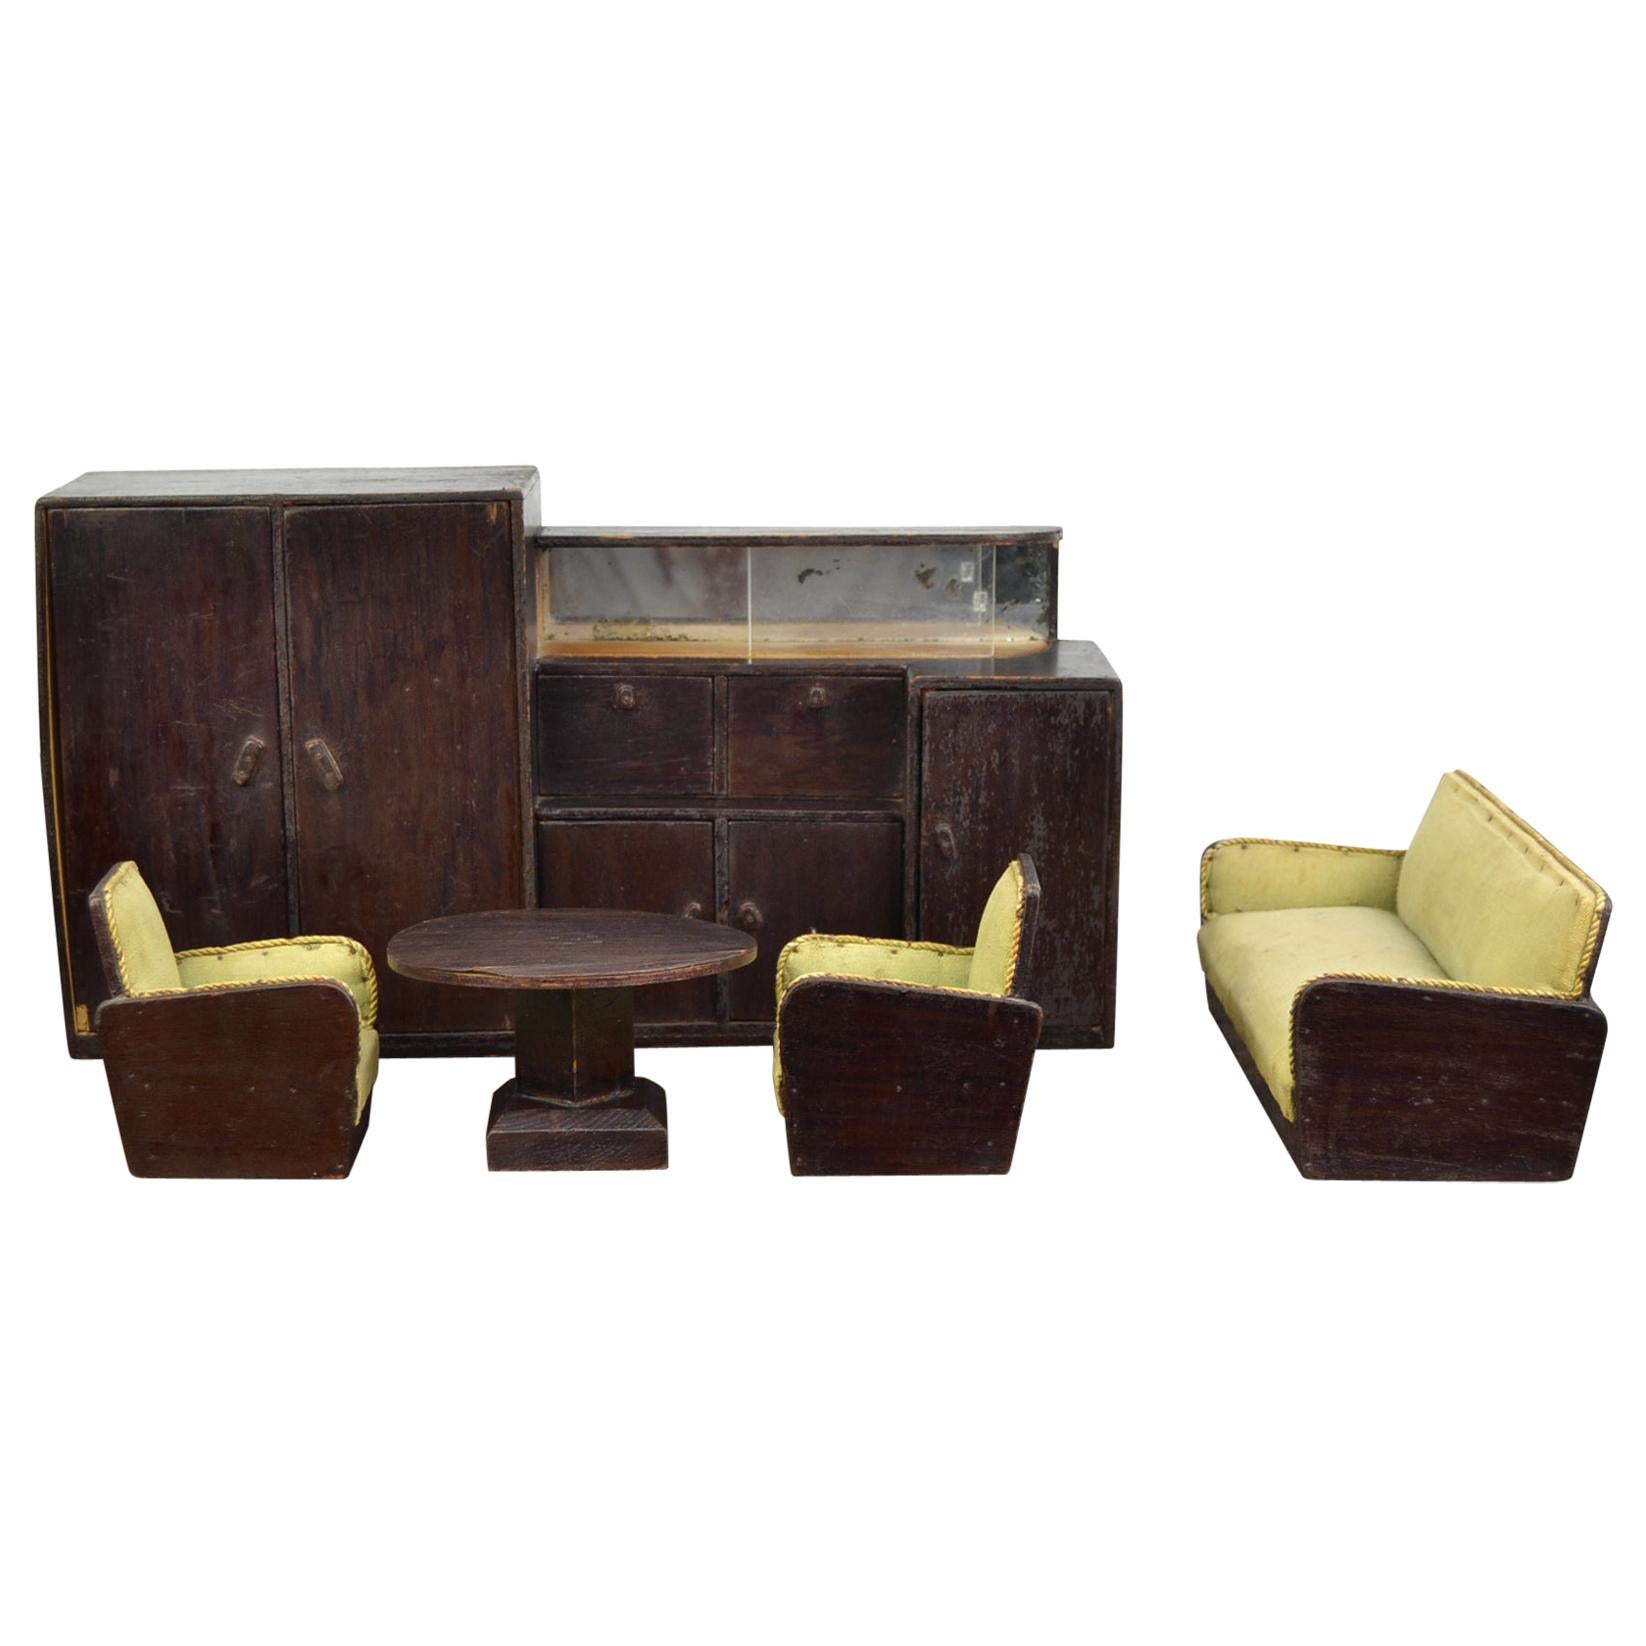 Miniature Art Deco Furniture, Club Chairs, Coffee Table, Seat and Cabinet For Sale